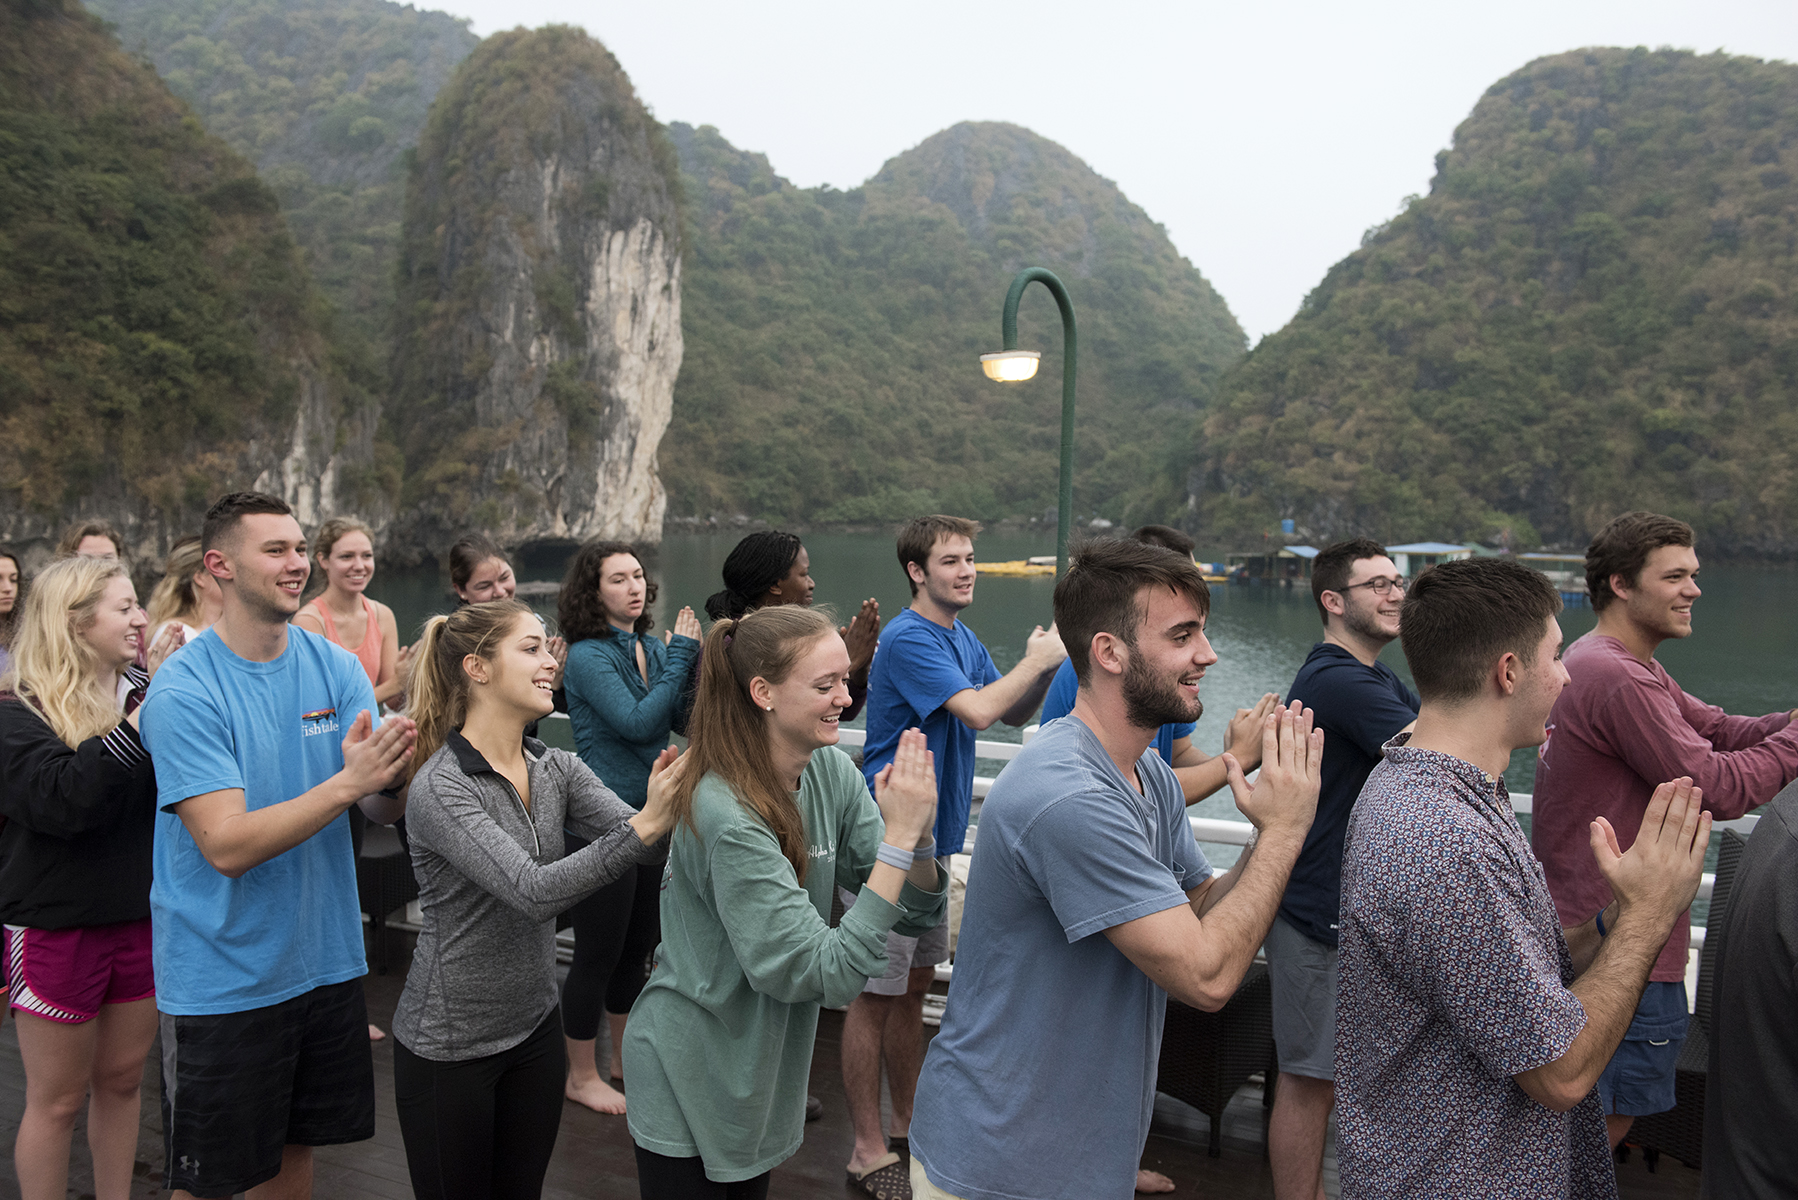 Elon students practice Tai Chi on the deck of a cruise boat on Halong Bay in central Vietnam while studying abroad.